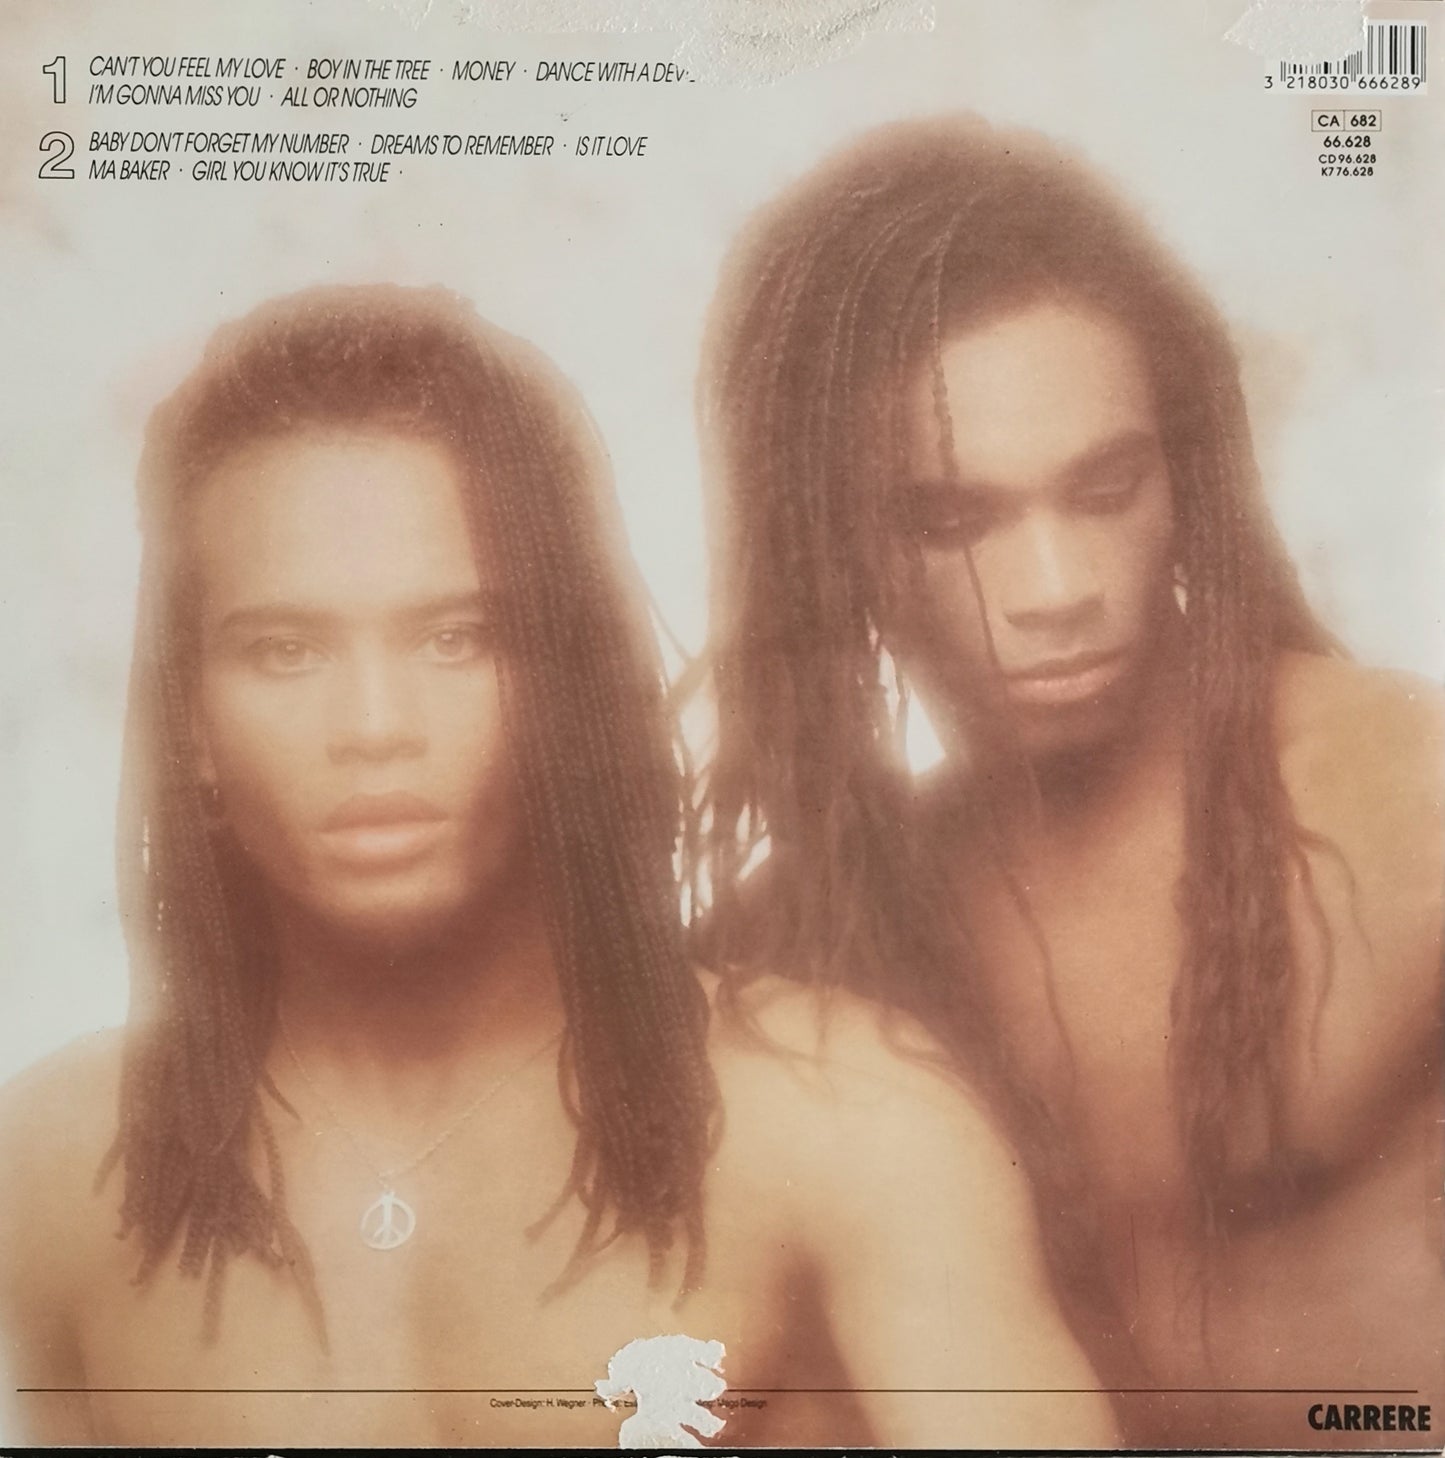 MILLI VANILLI - All Or Nothing (The First Album)